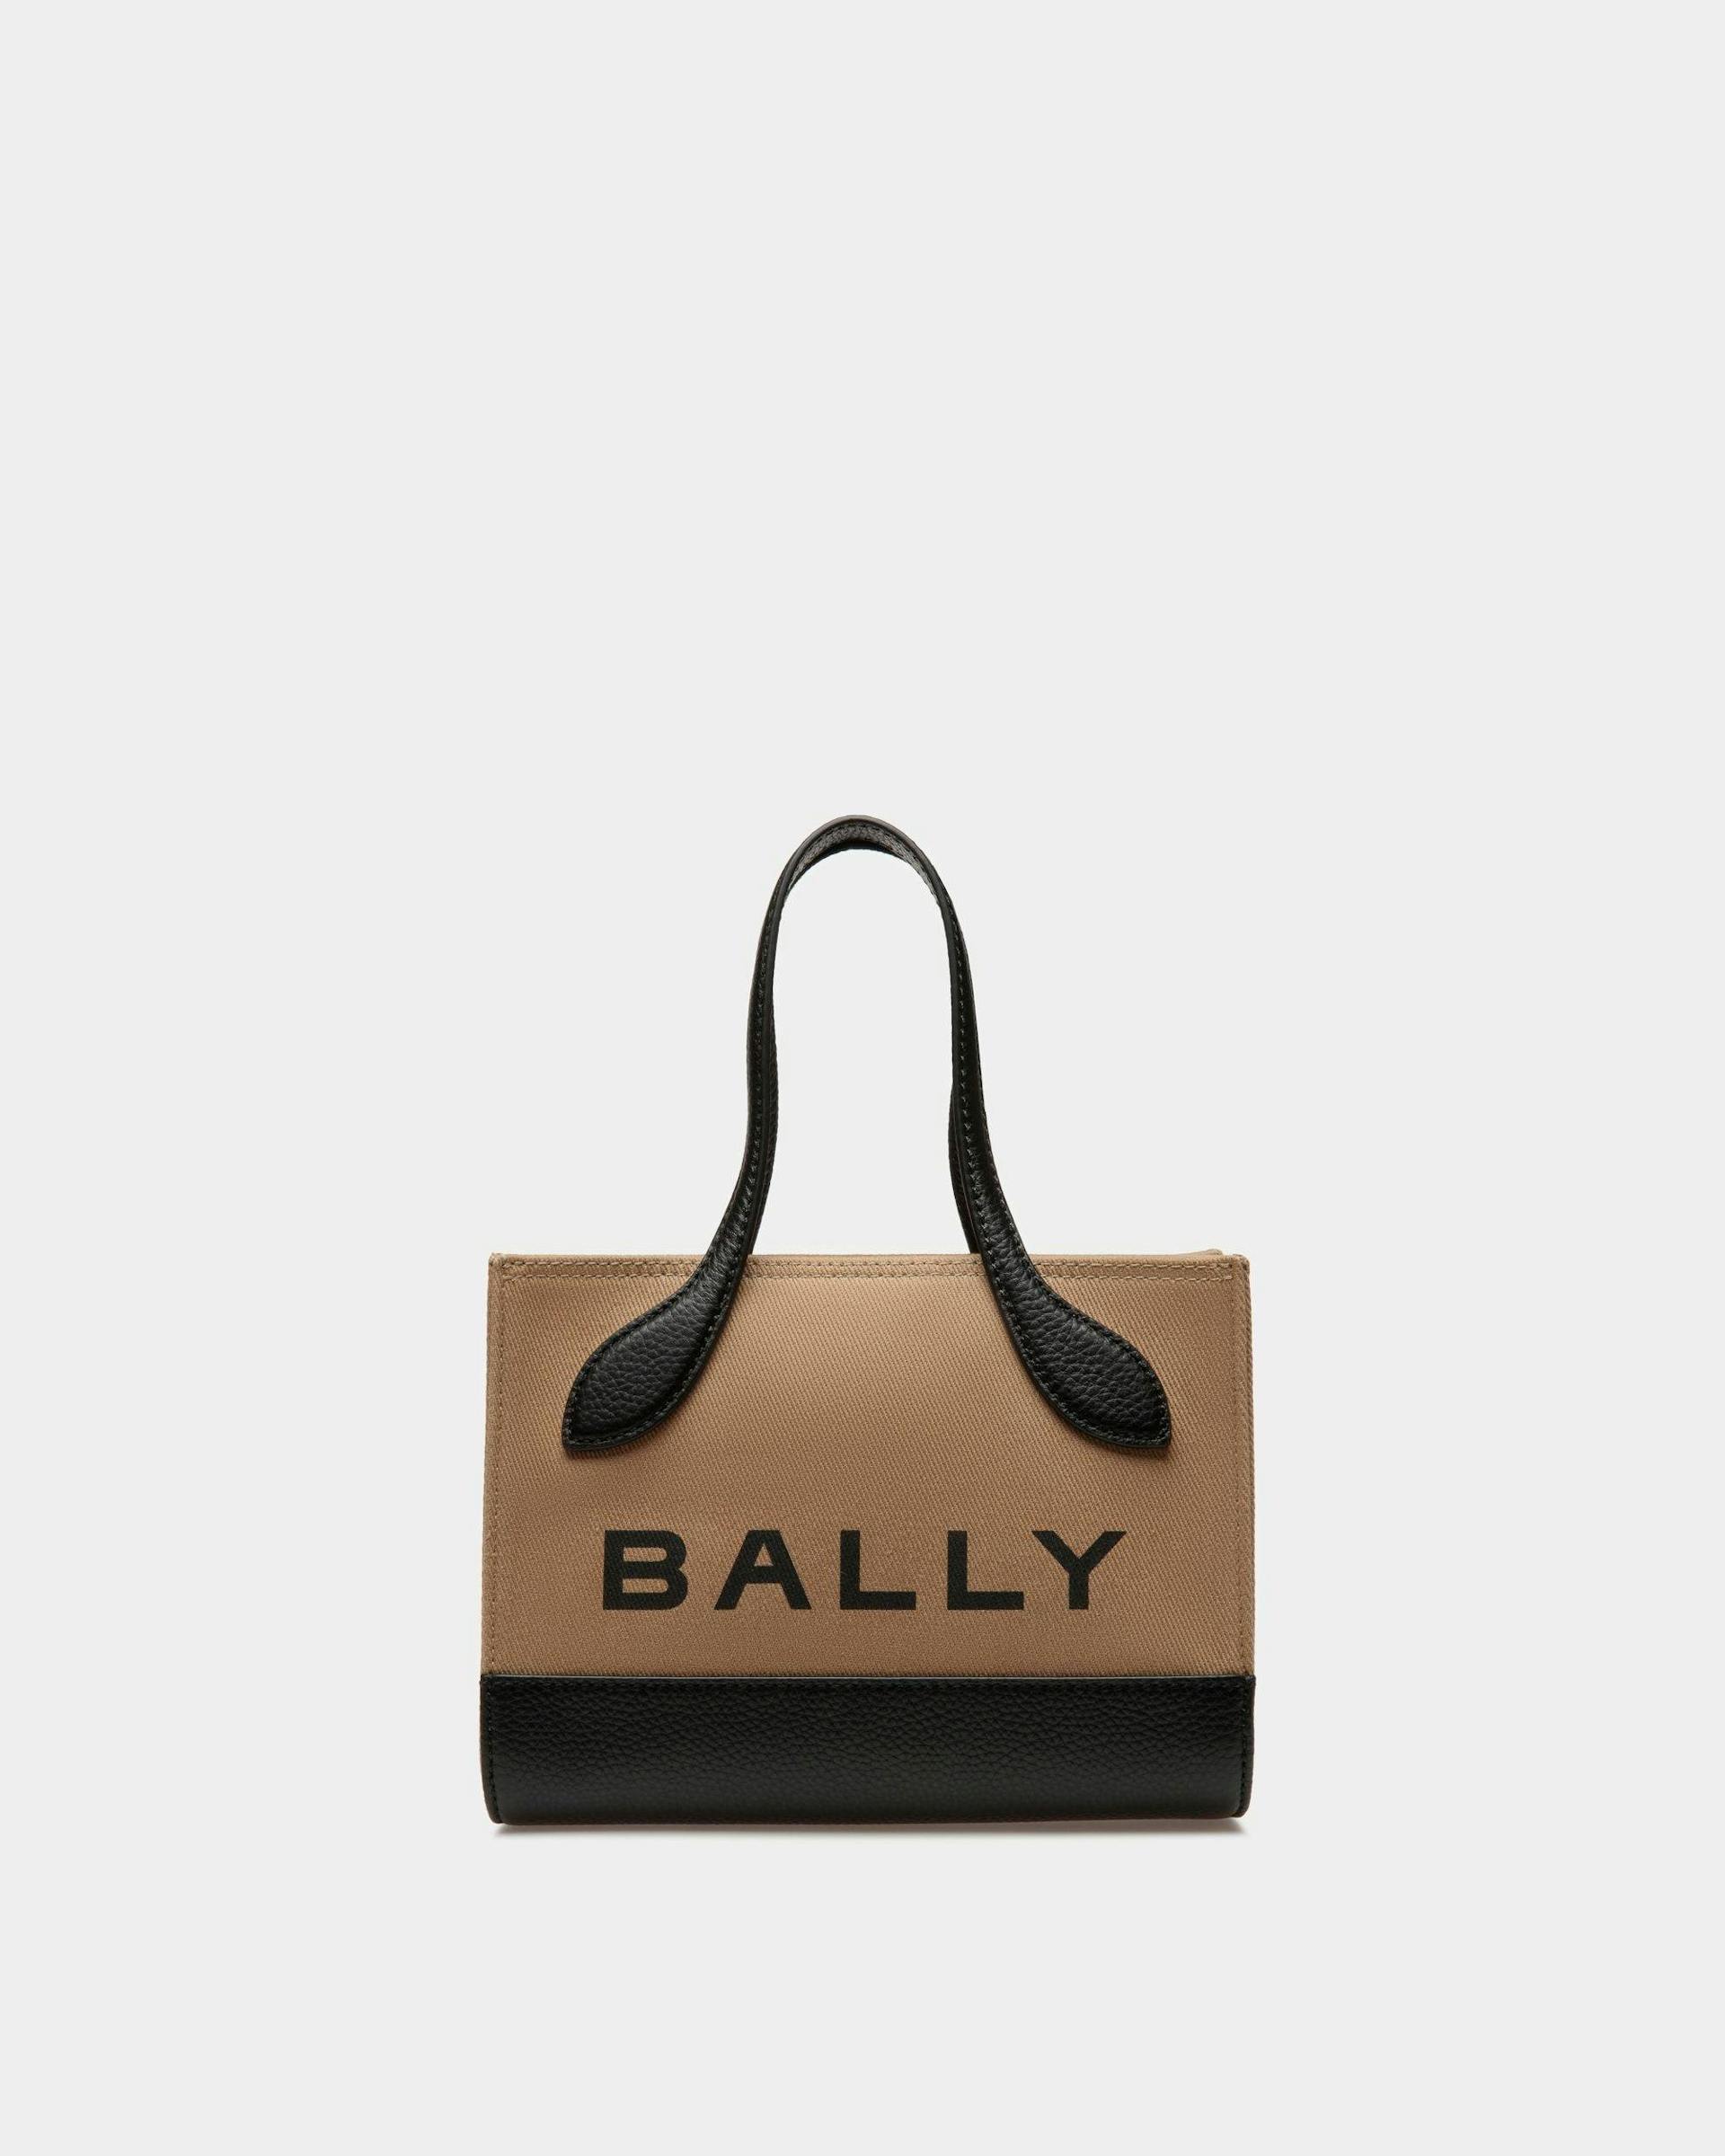 Bar Minibag In Sand And Black Fabric - Women's - Bally - 01